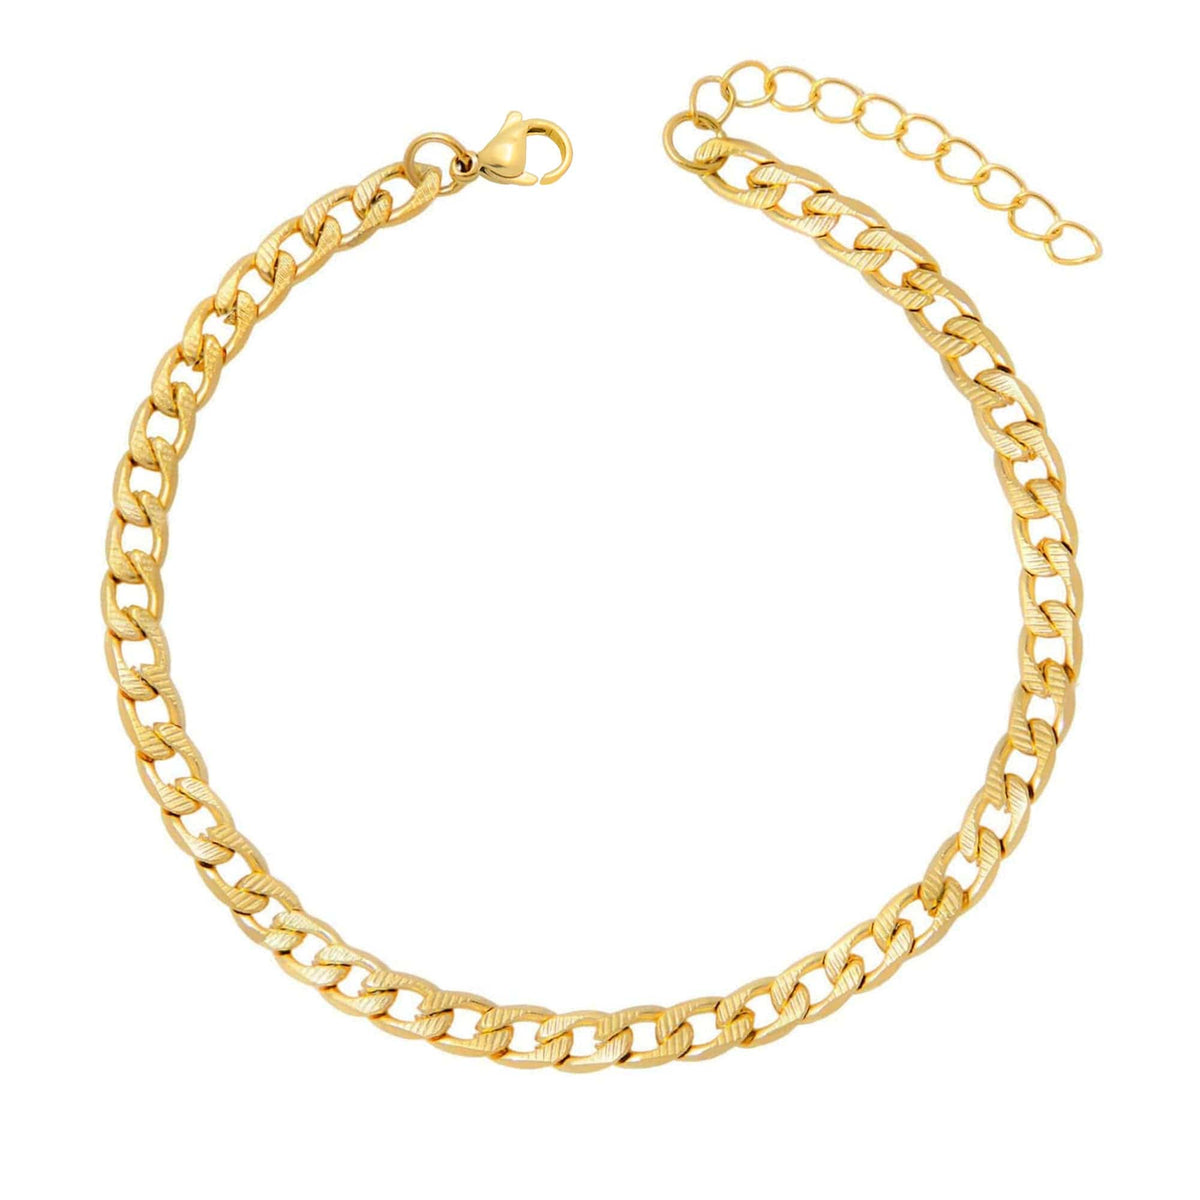 BohoMoon Stainless Steel Janis Anklet Gold